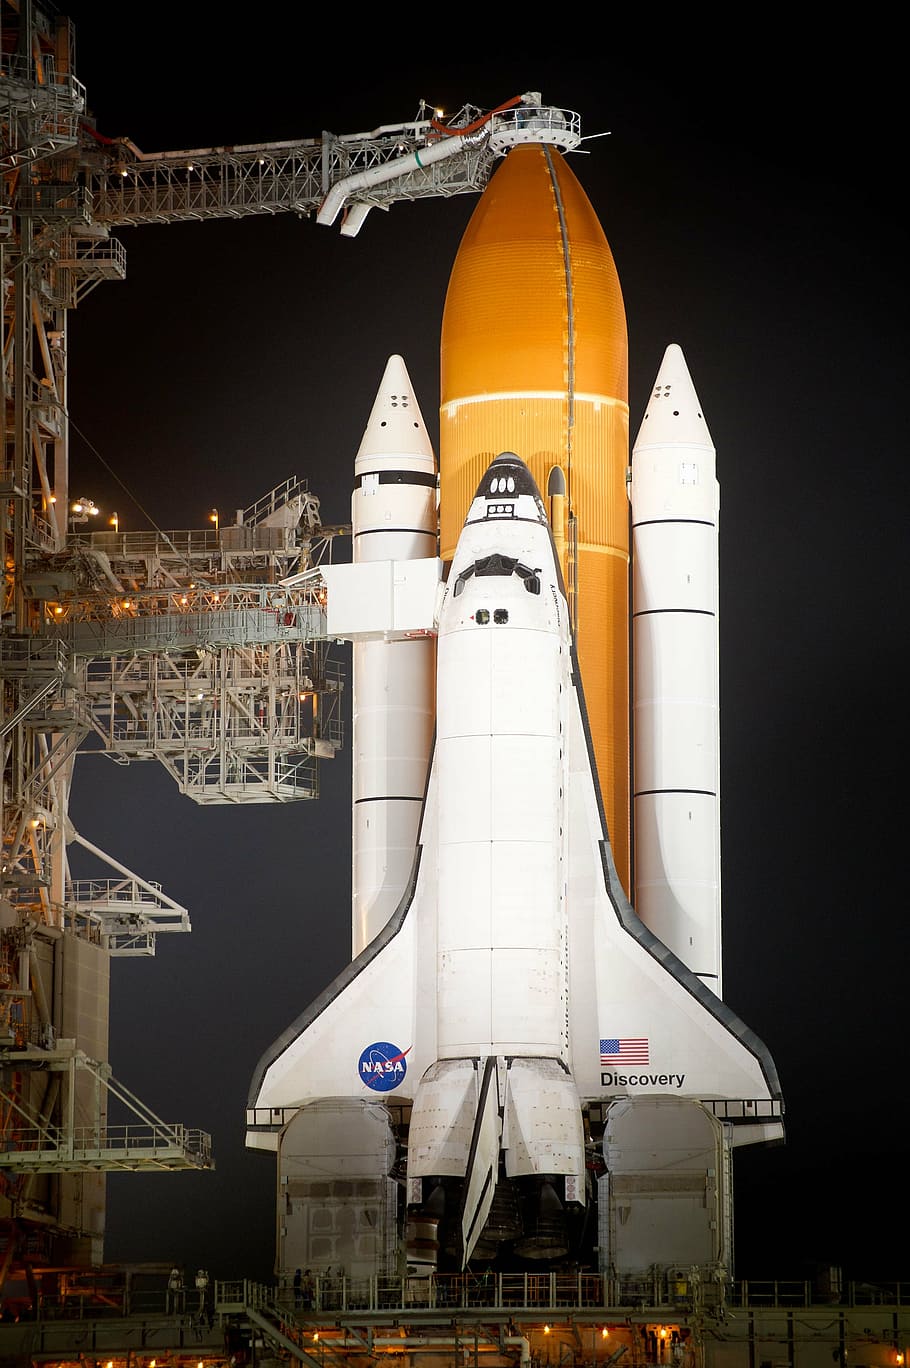 white, orange, nasa discovery space shuttle, nighttime, space shuttle, discovery, shuttle, space shuttle discovery, pre-flight, launch pad